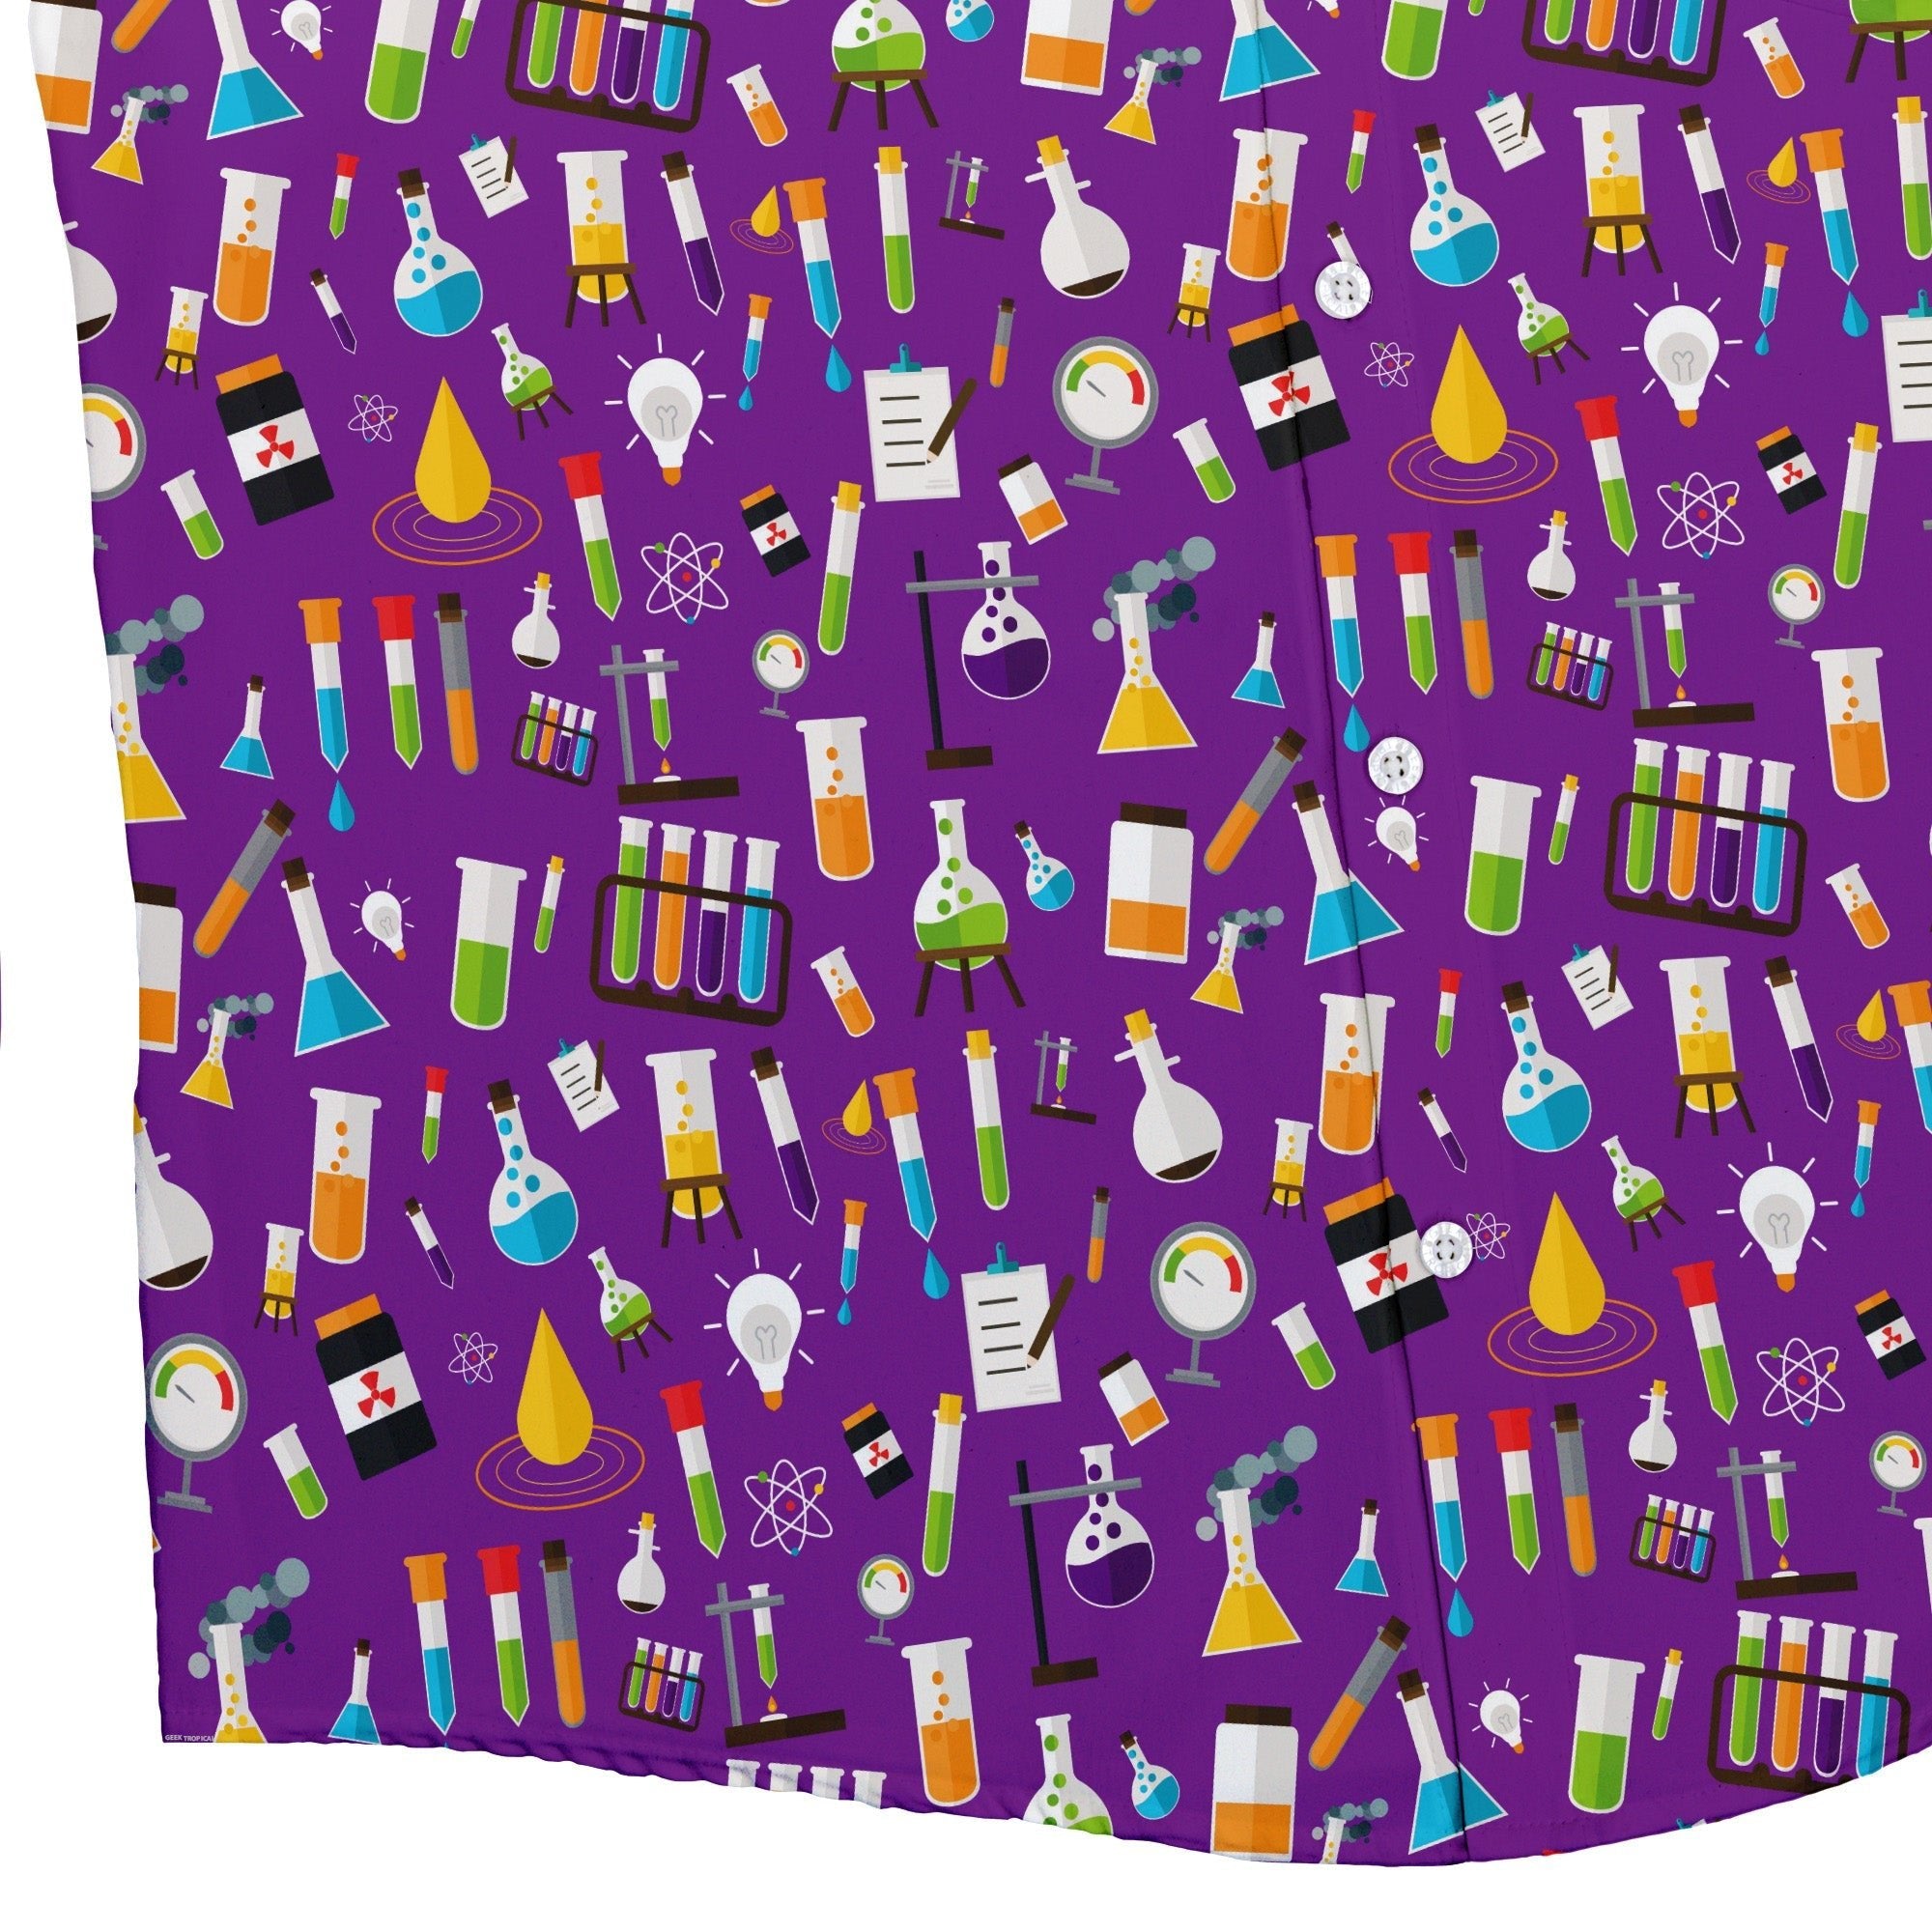 Lab Beakers Purple Science Button Up Shirt - adult sizing - Maximalist Patterns - science print